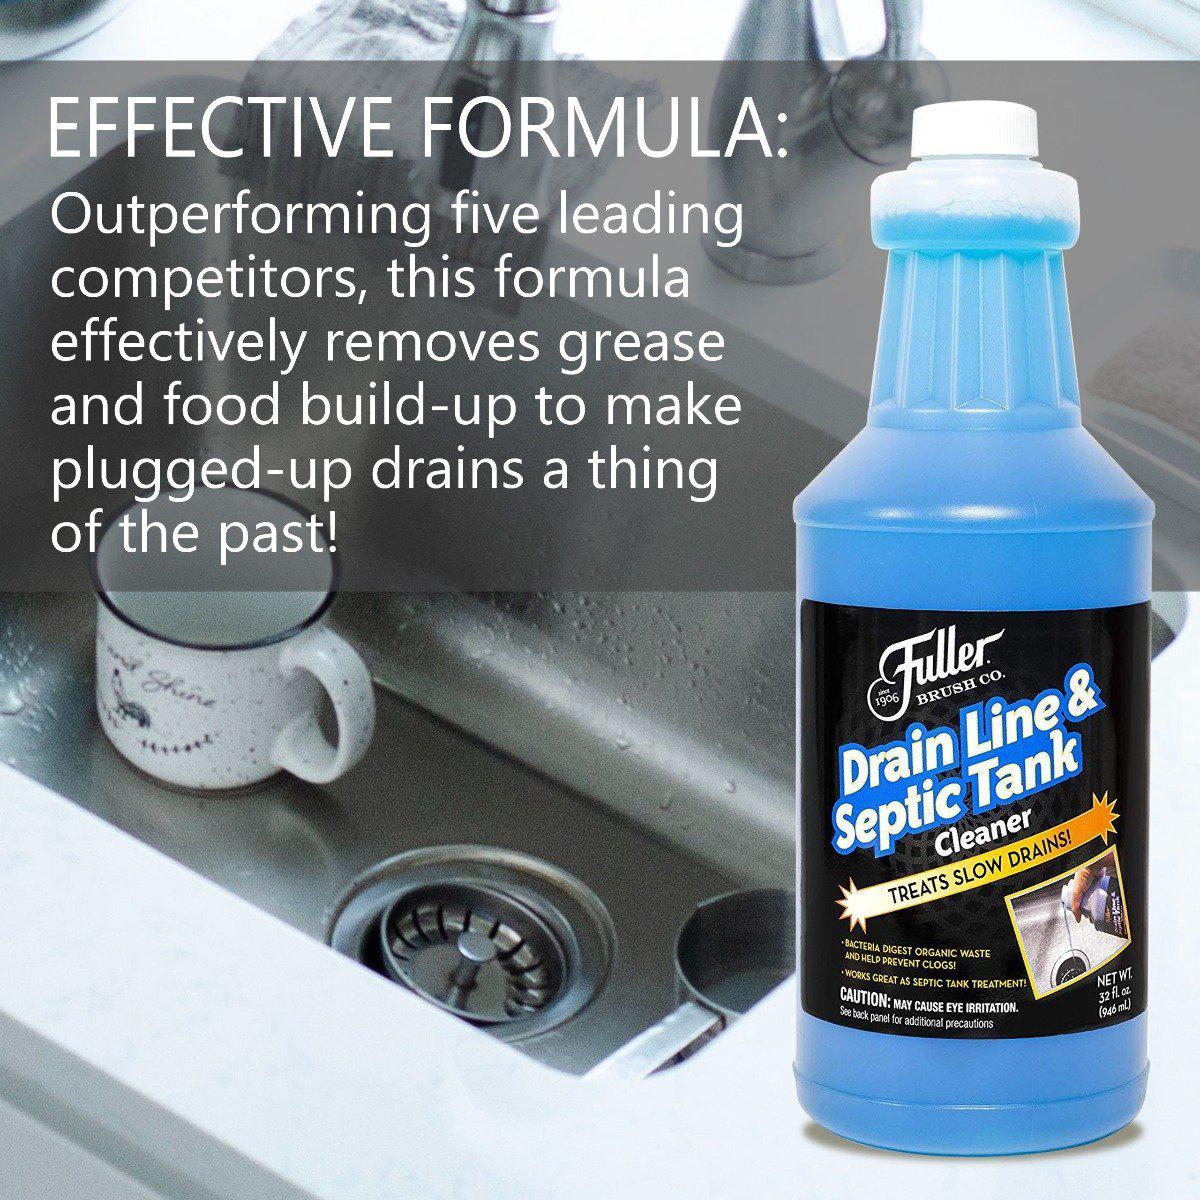 Drain Line & Septic Tank Cleaner - Septic System Treatment & Slow Running Drain Solution-Cleaning Agents-Fuller Brush Company